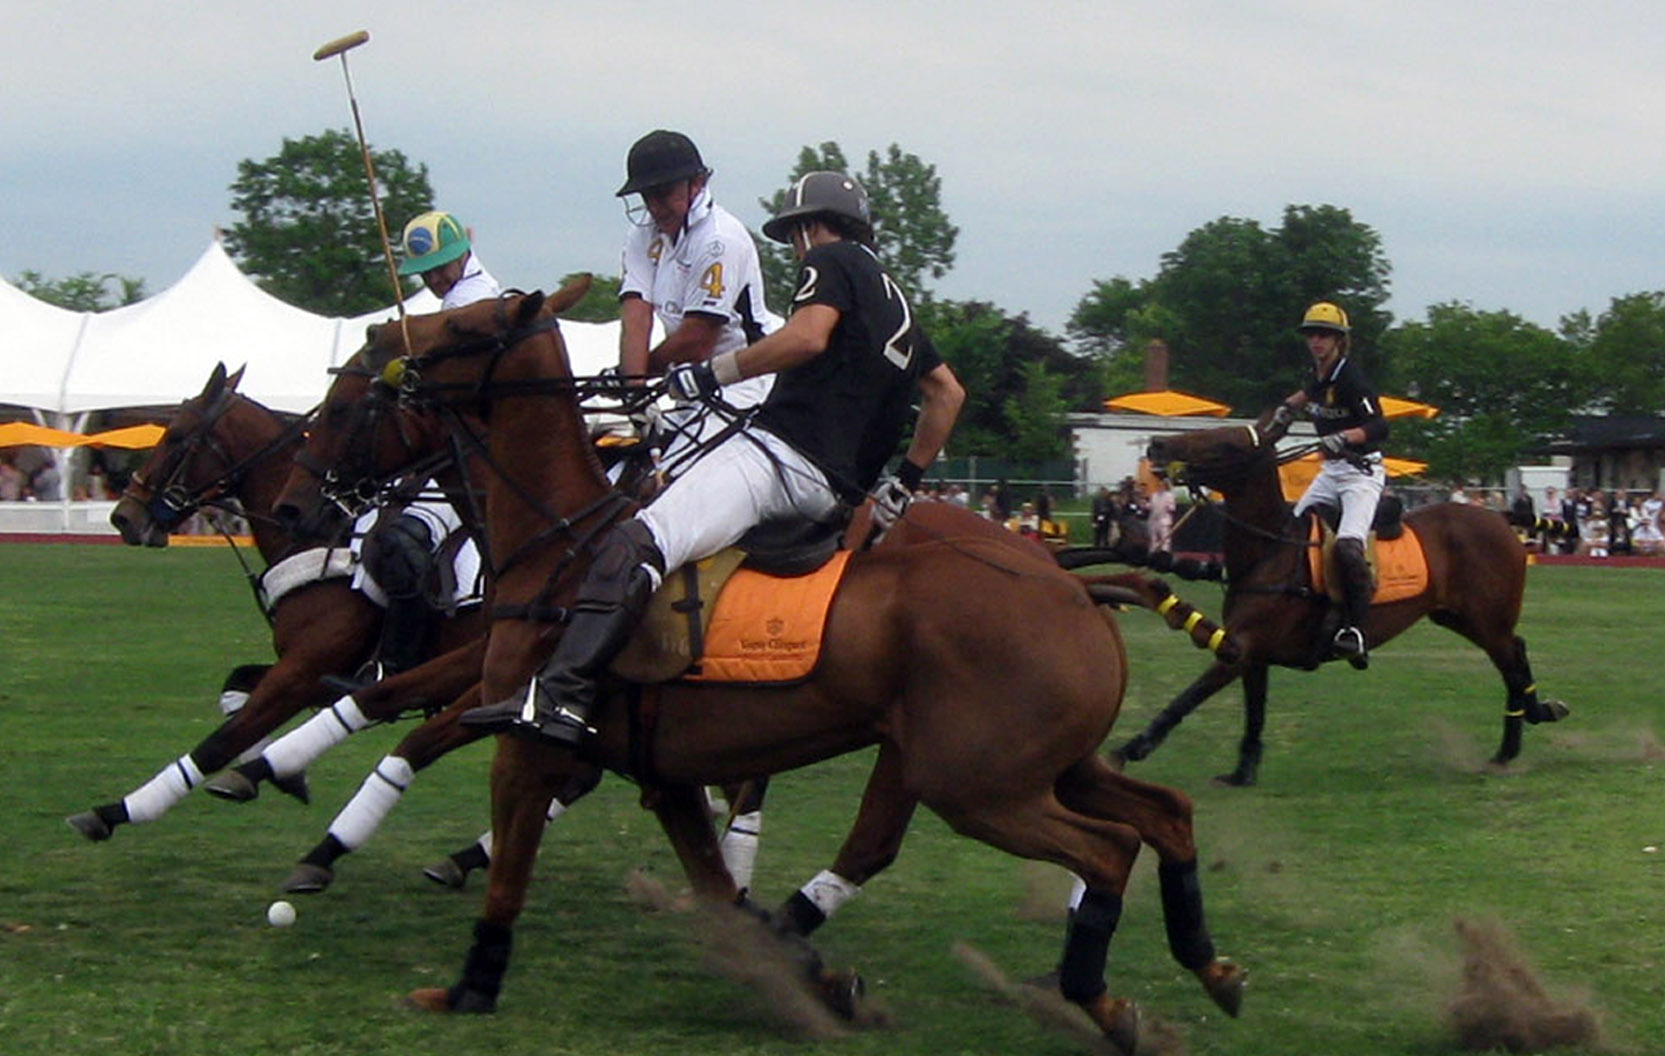 nacho04 - CELEB POLO MATCH BRINGS OUT GRACE, GLAMOUR AND BEAUTY